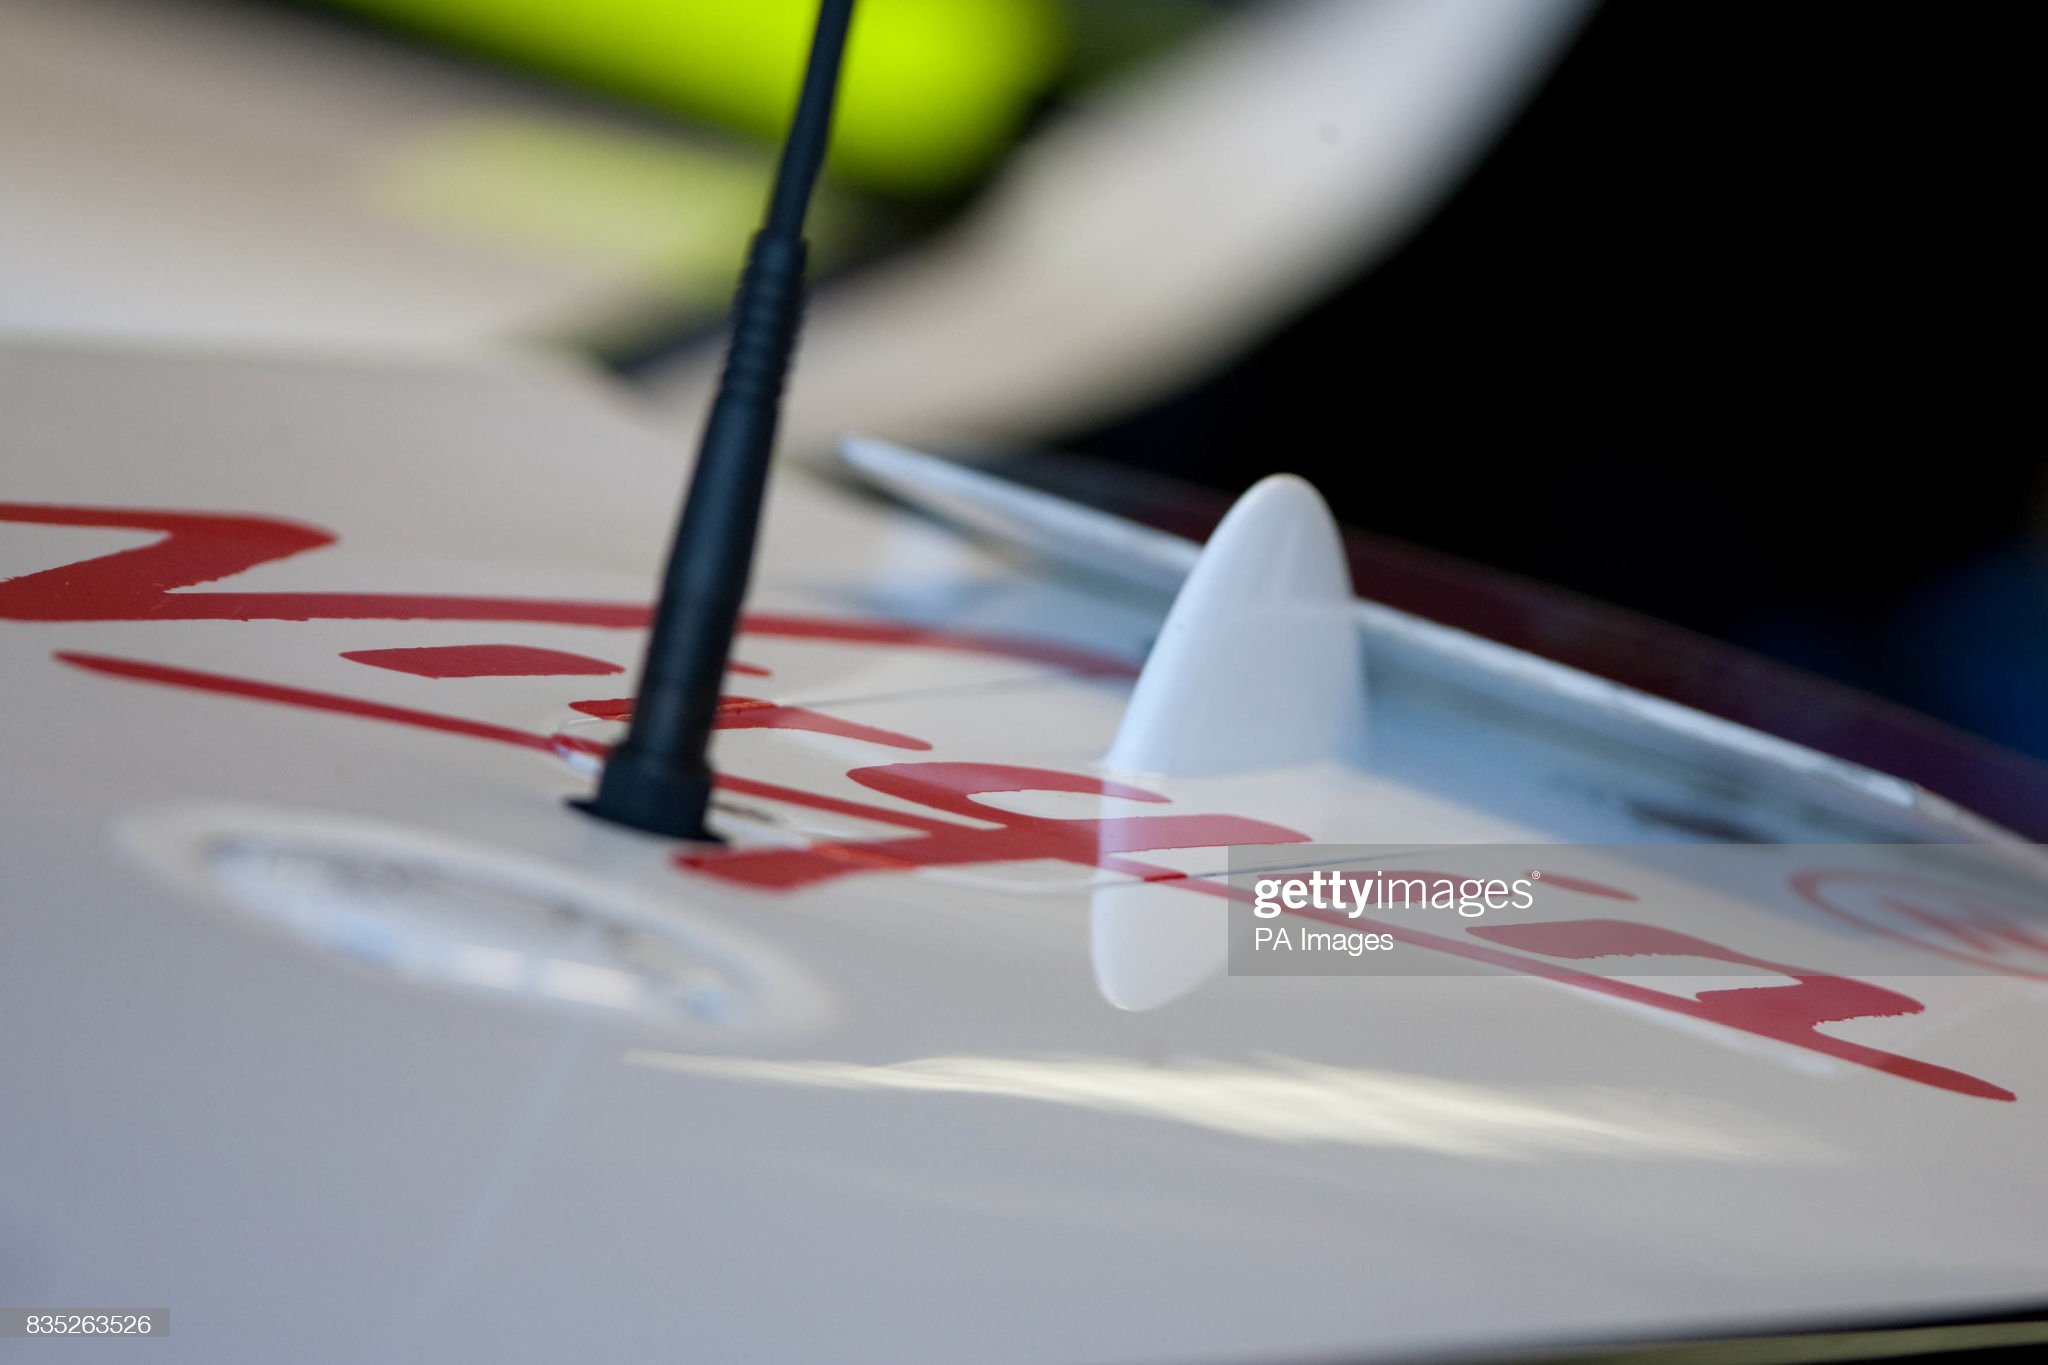 The new Virgin sponsorship logo is applied to a Brawn GP car before the qualifying session at Albert Park in Melbourne, Australia, on 23 March 2009. 